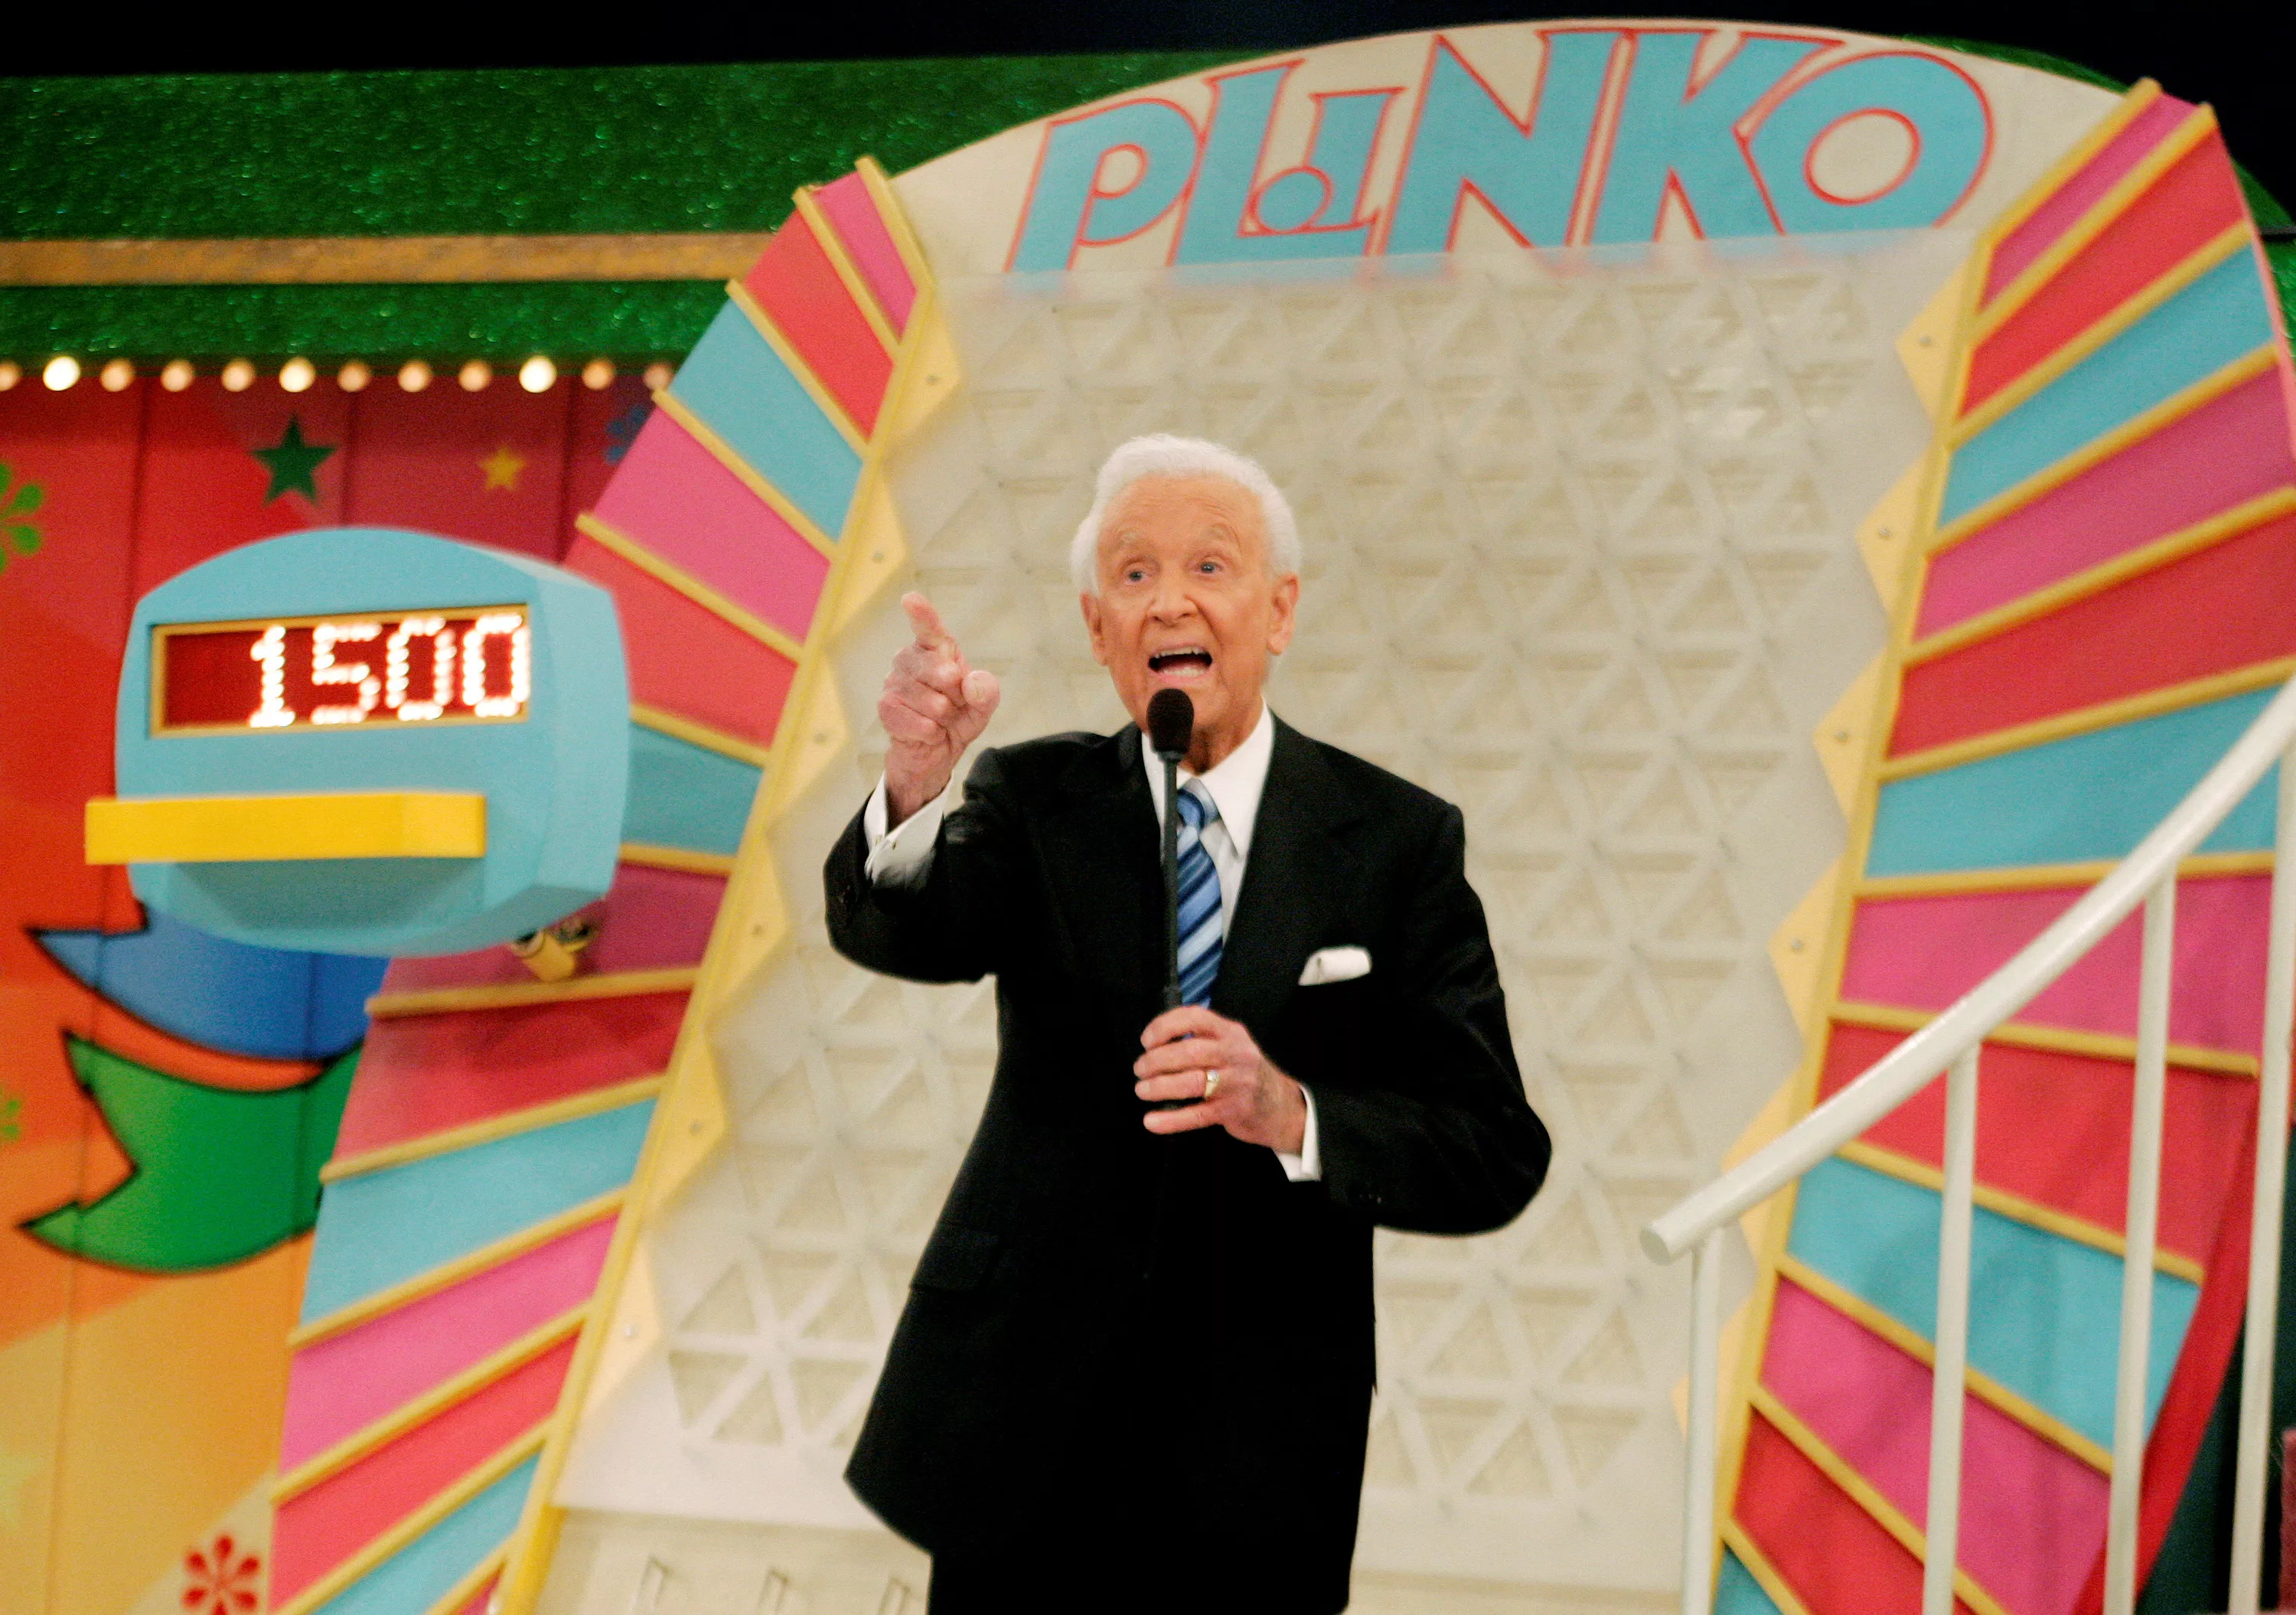 file-photo-bob-barker-introduces-the-plinko-game-segment-during-the-taping-of-his-final-episode-of-the-price-is-right-in-los-angeles